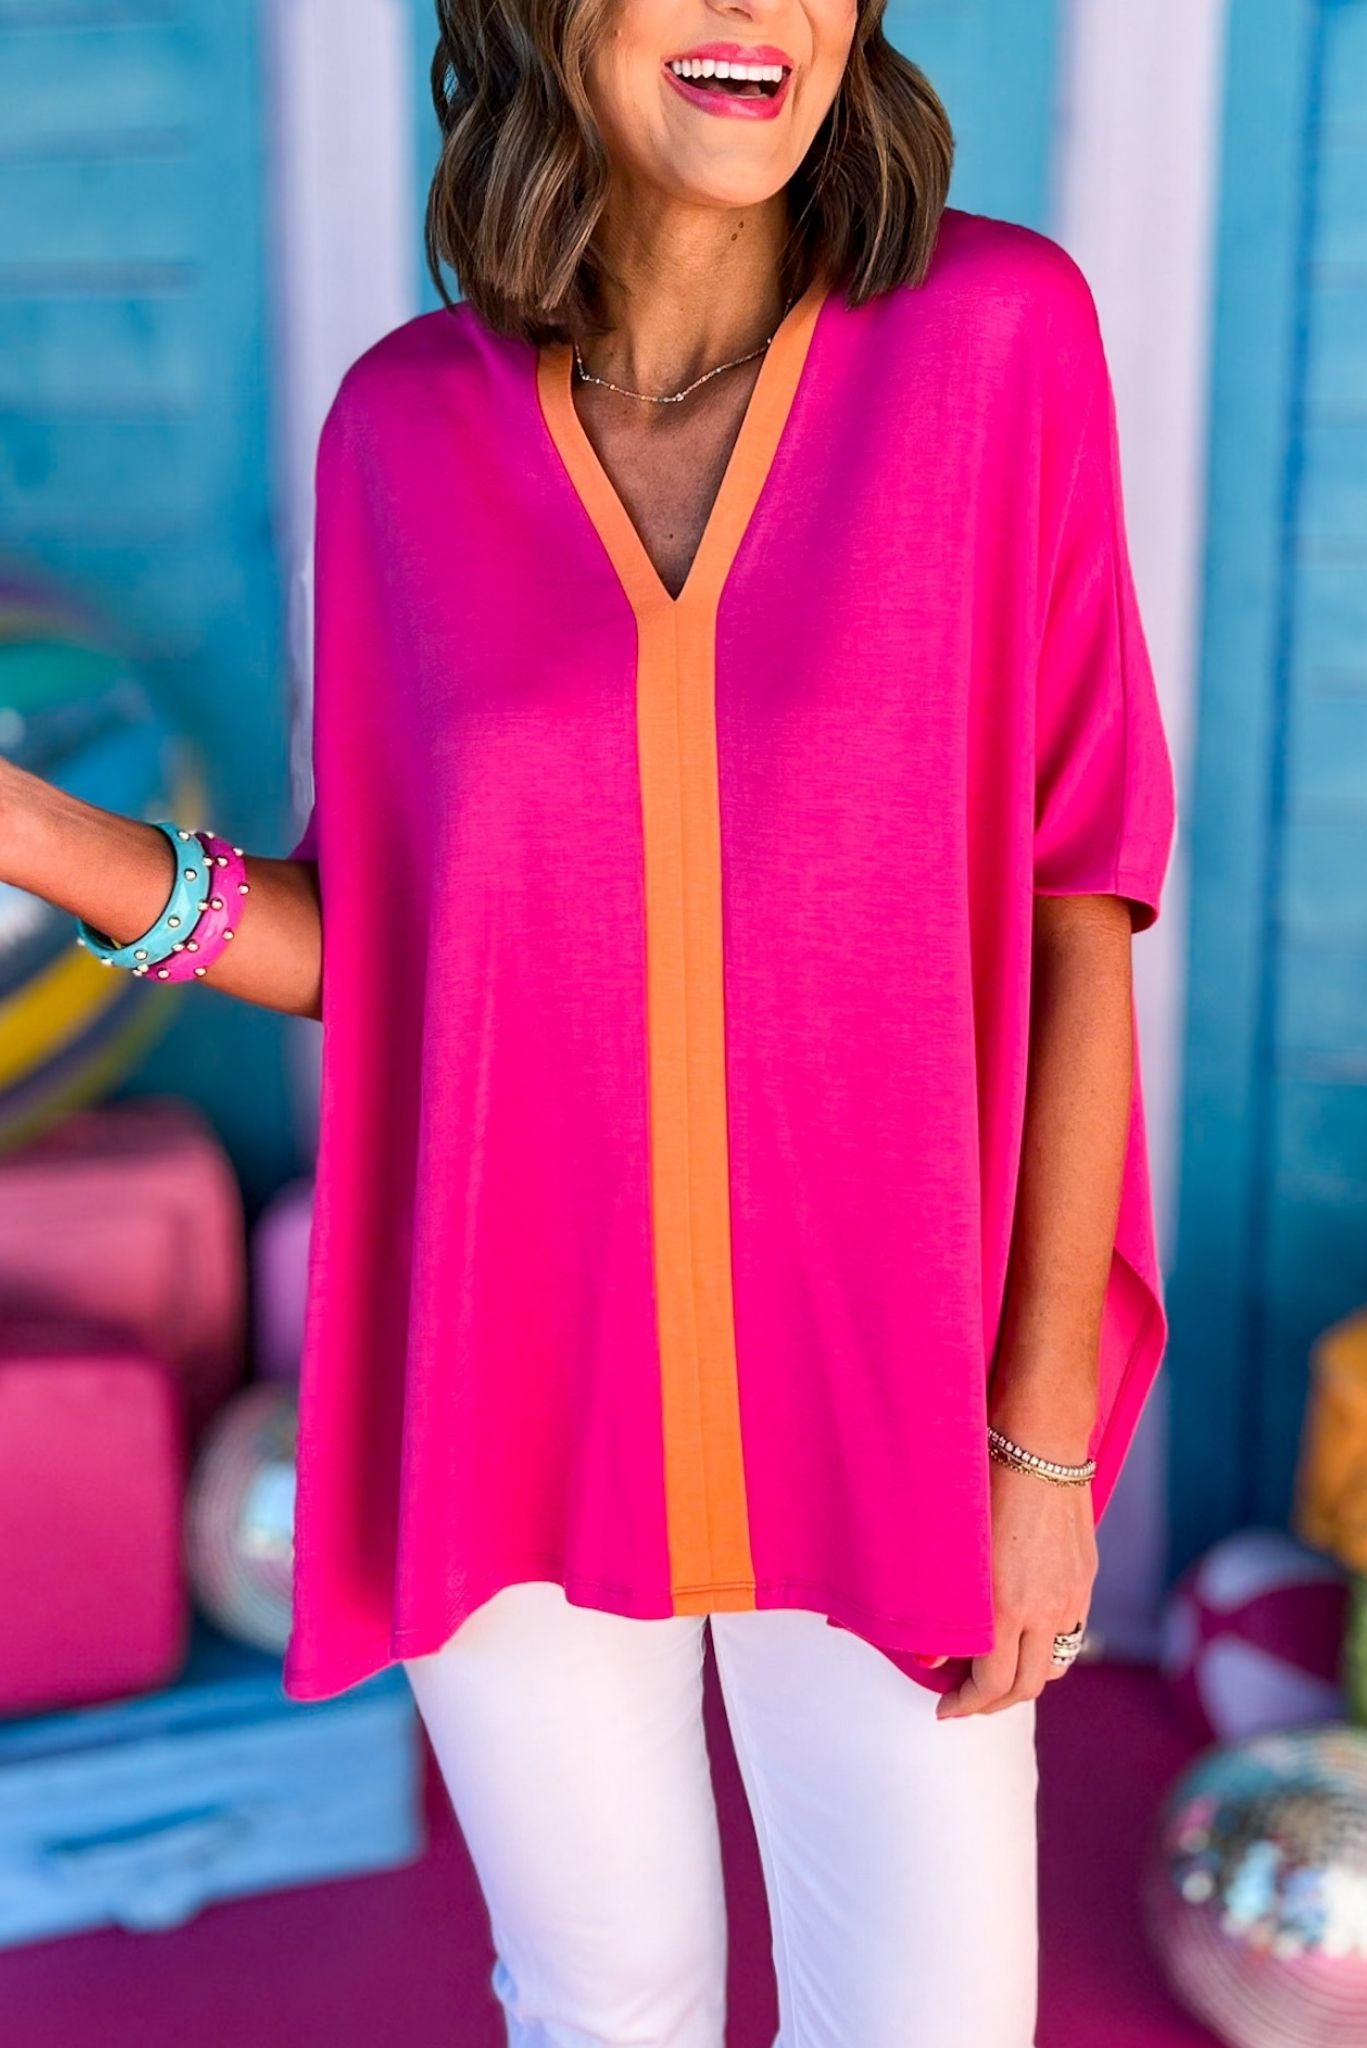 SSYS The Harper Colorblock Tent Top In Pink, ssys the label, spring break top, spring break style, spring fashion affordable fashion, elevated style, bright style, bright top, mom style, shop style your senses by mallory fitzsimmons, ssys by mallory fitzsimmons